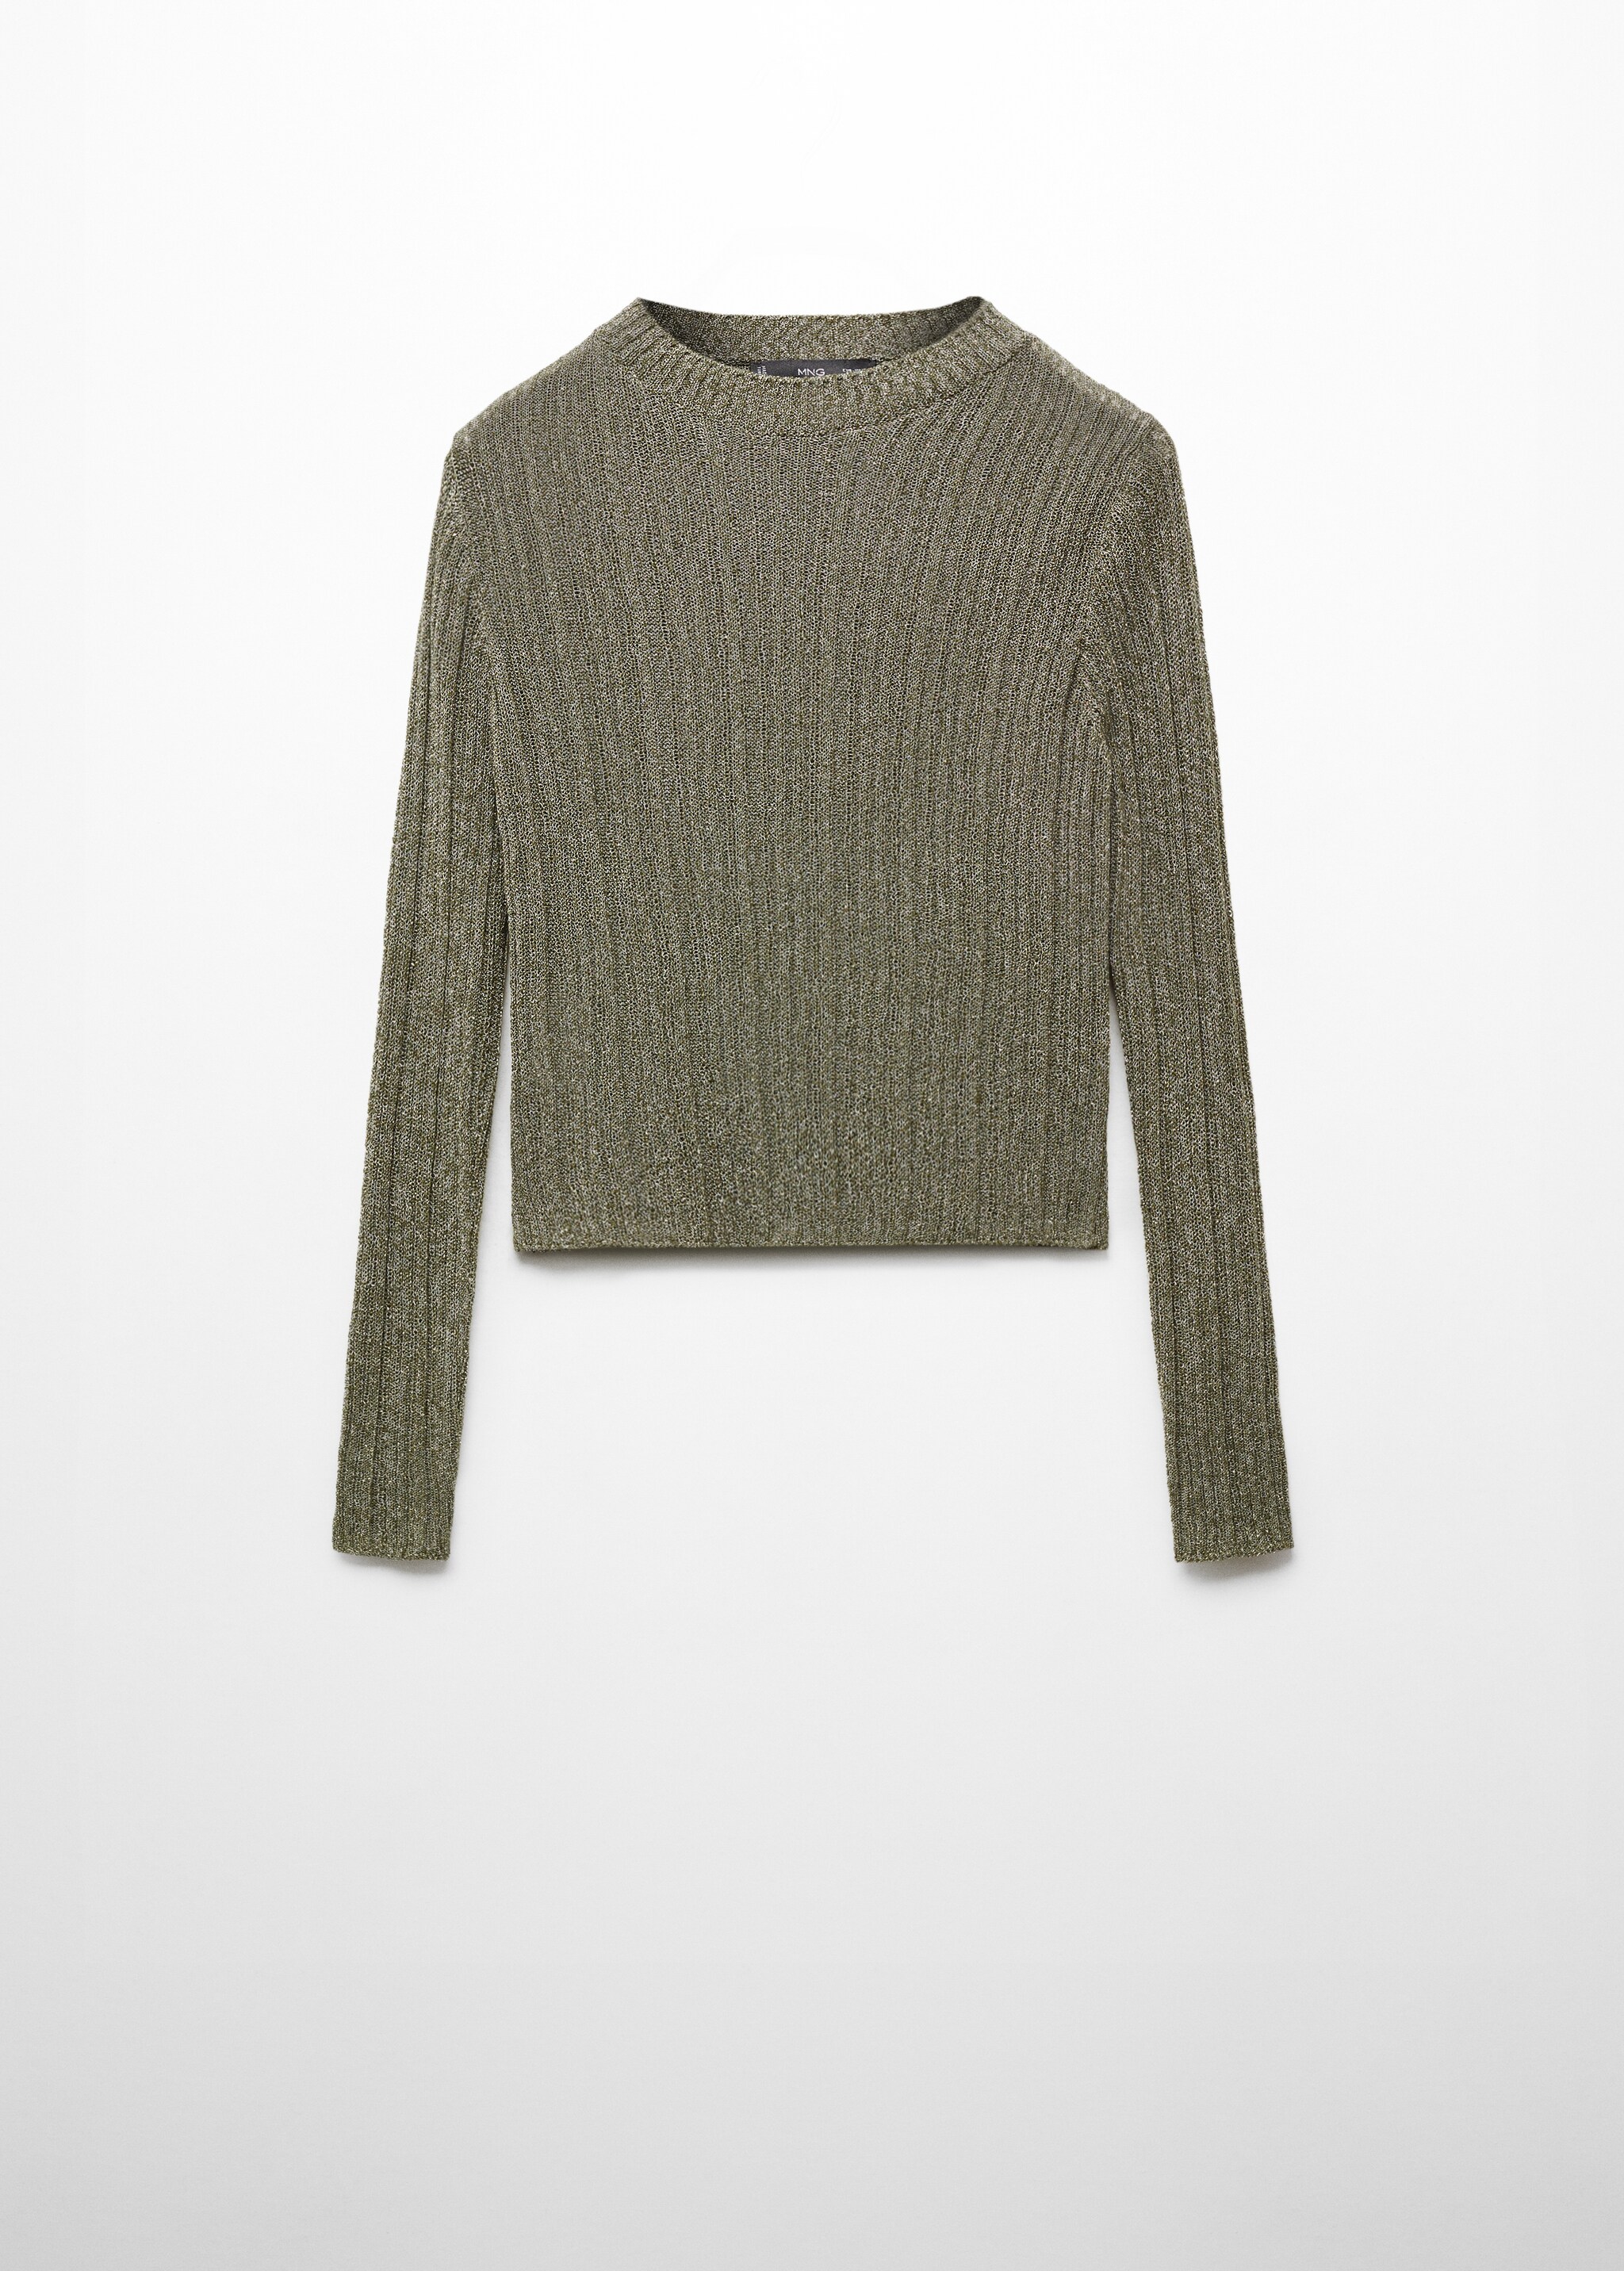 Lurex perkins-neck sweater - Article without model